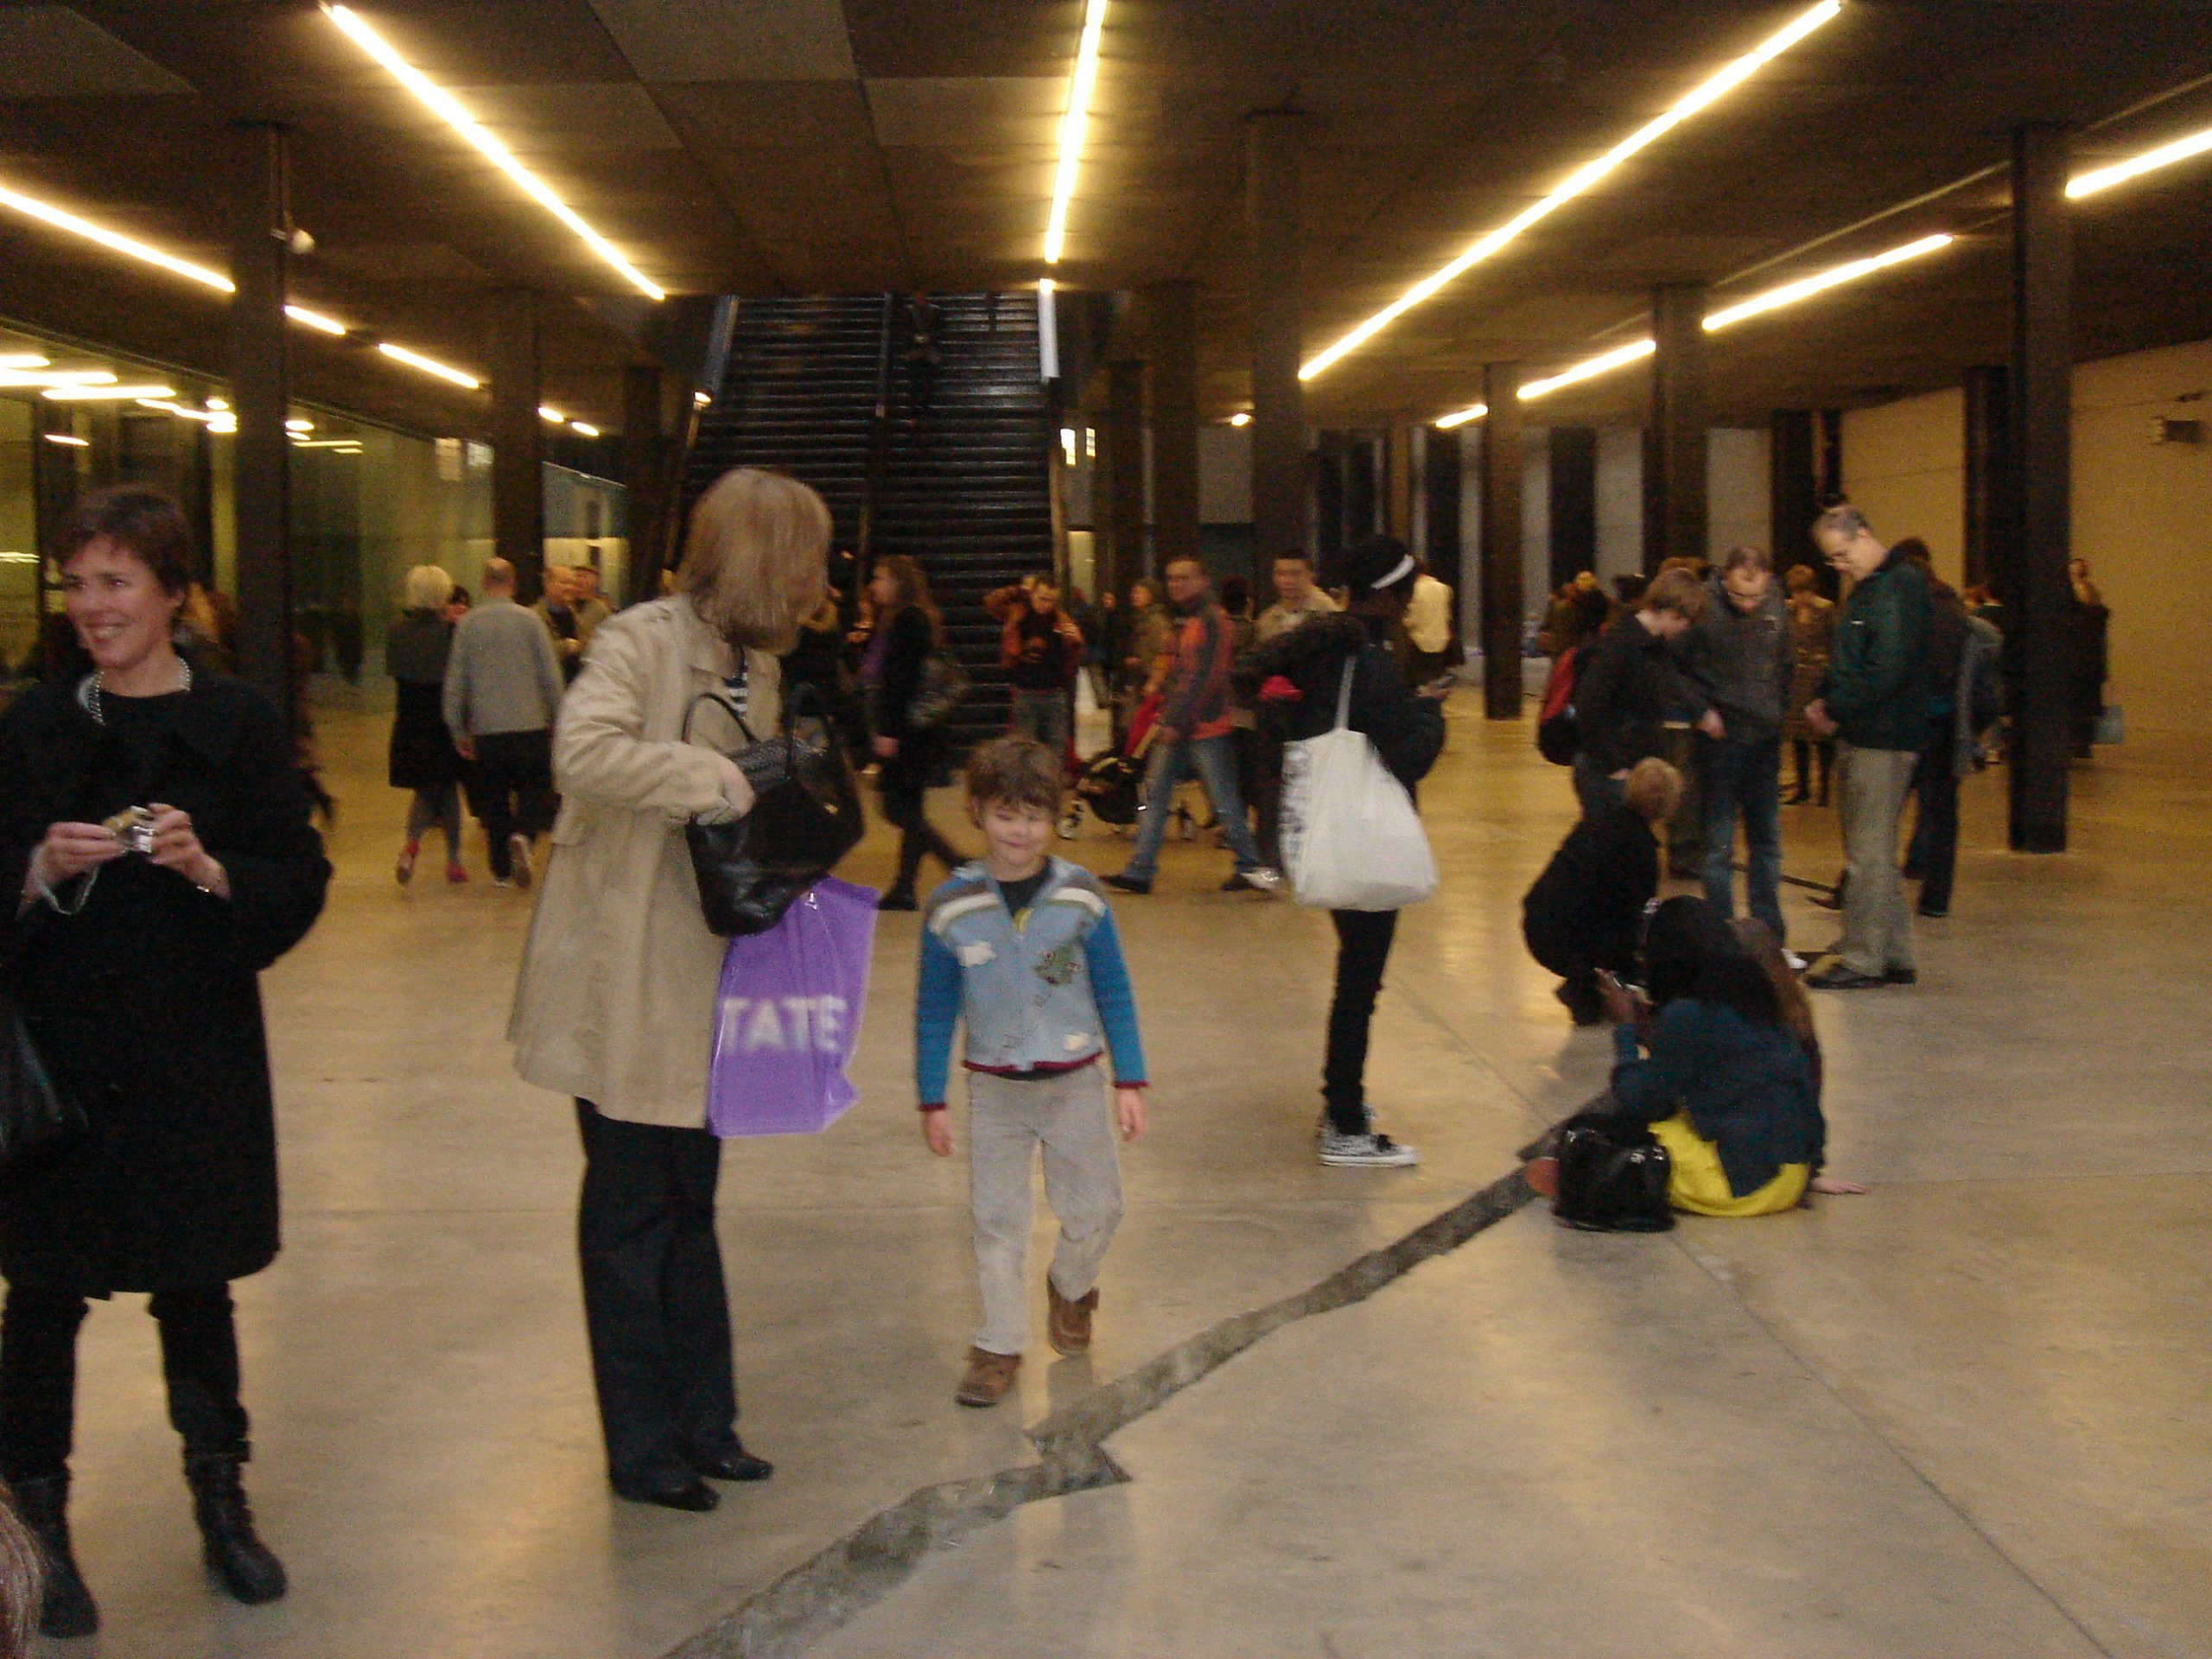 In the basement of the Tate Modern, a crack zigzags across the floor. A small boy looks at it amused. People are going in different directions.